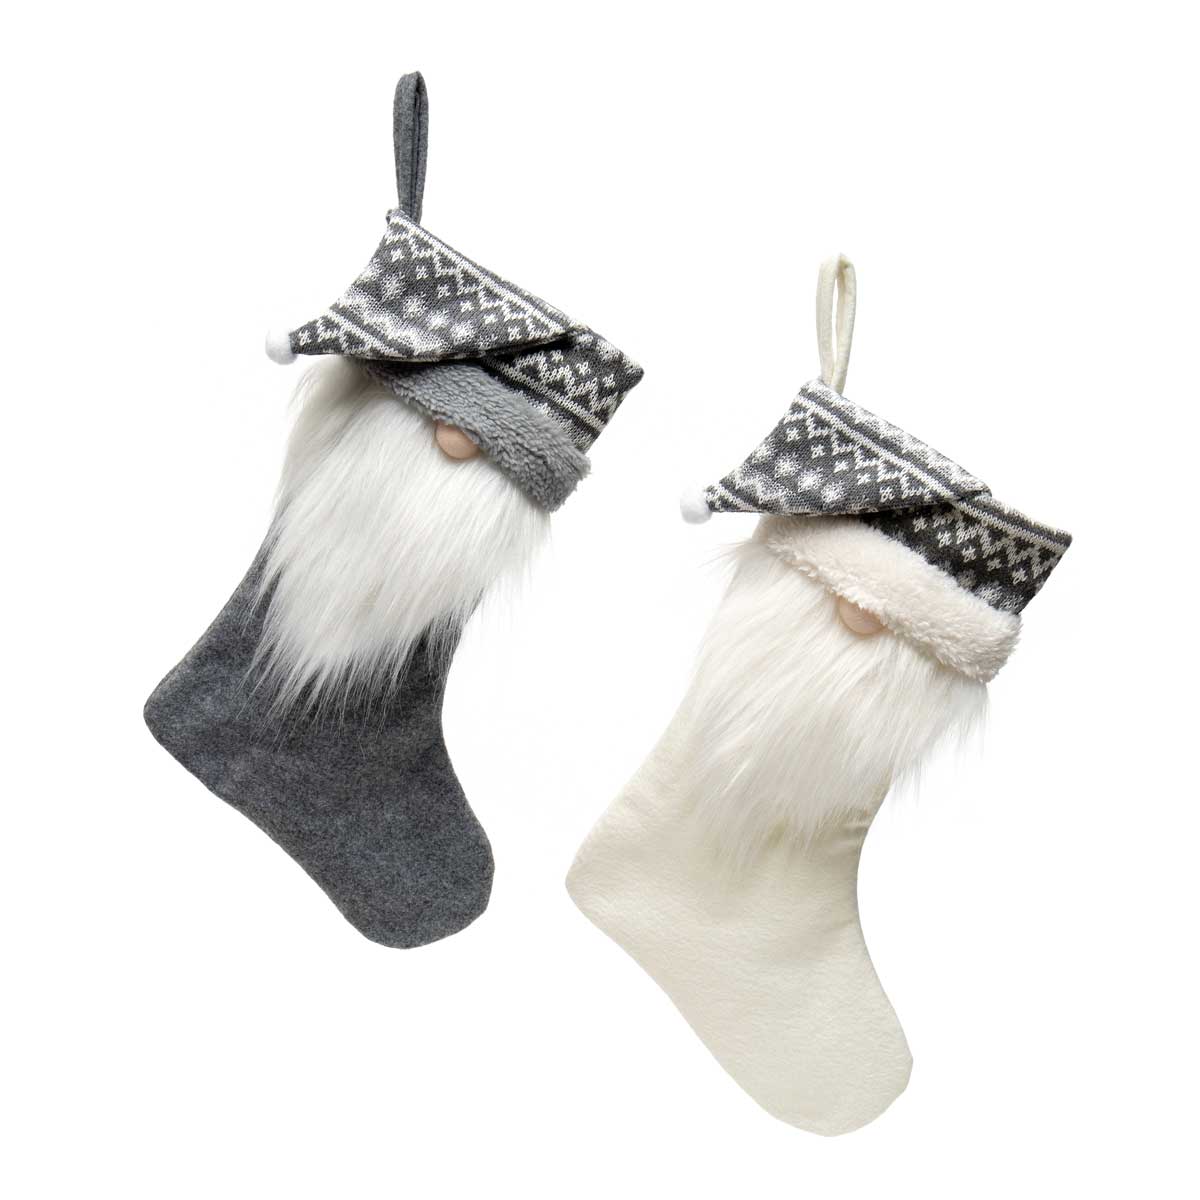 Gnome Stocking Grey/Cream with Sweater Hat and Pom-Pom Set of 2